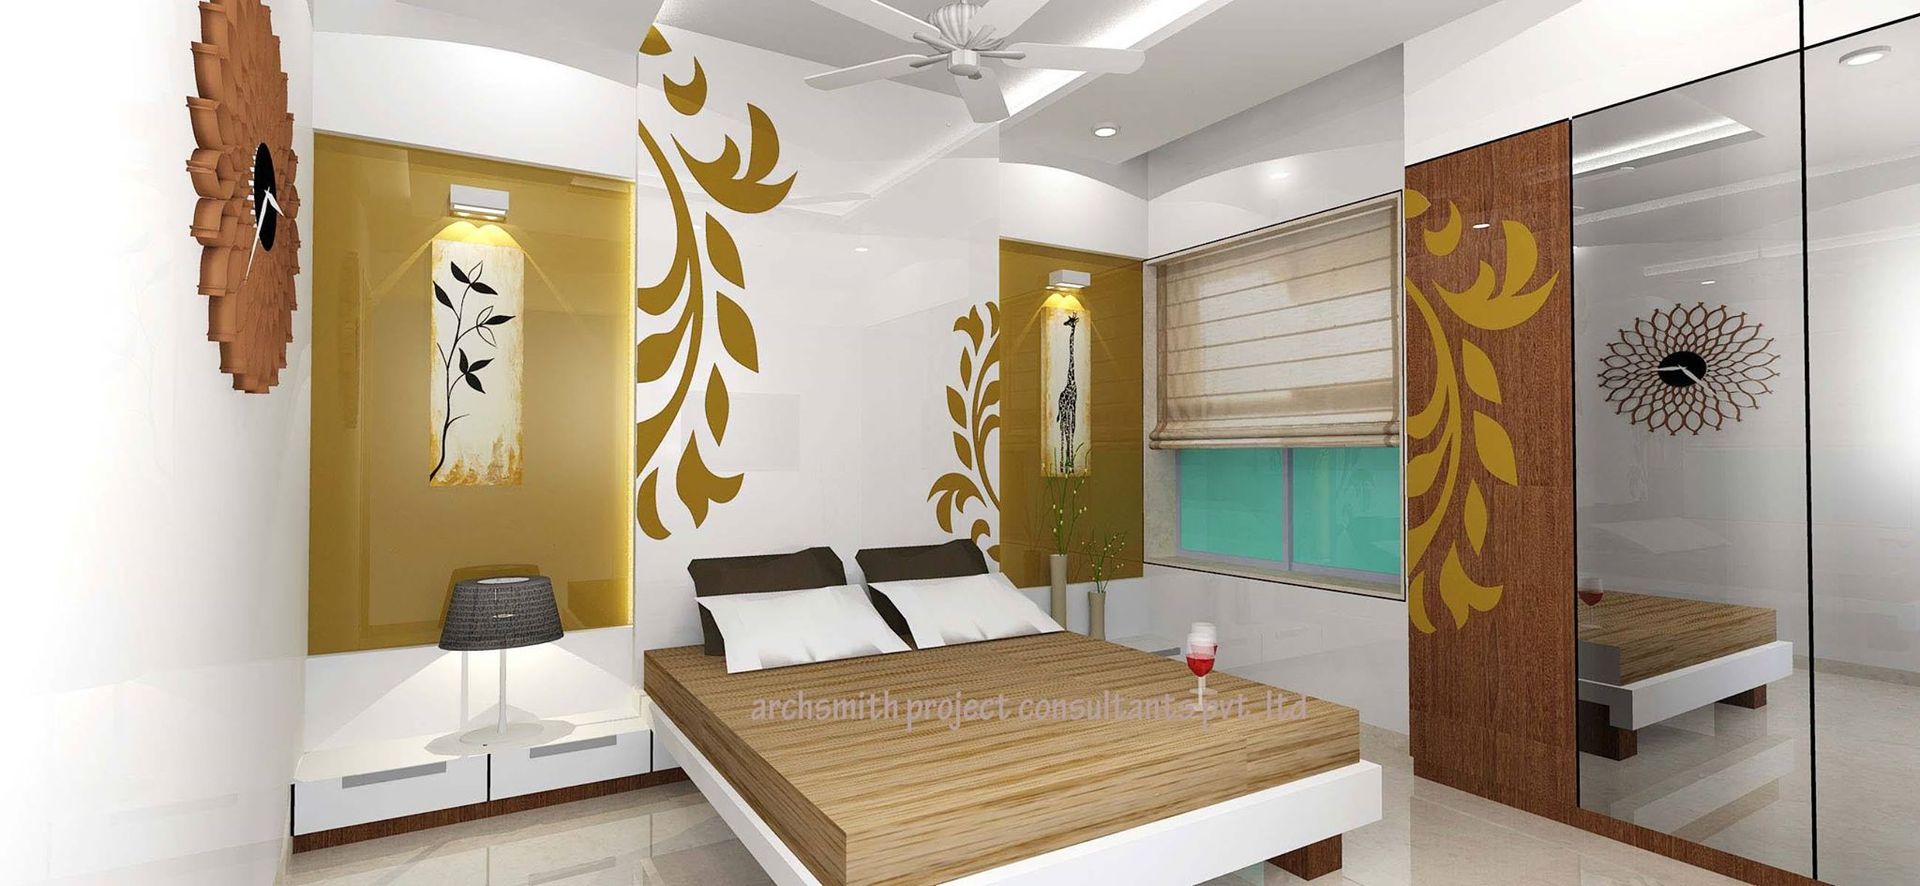 Bedroom Designs, Archsmith project consultant Archsmith project consultant 모던스타일 침실